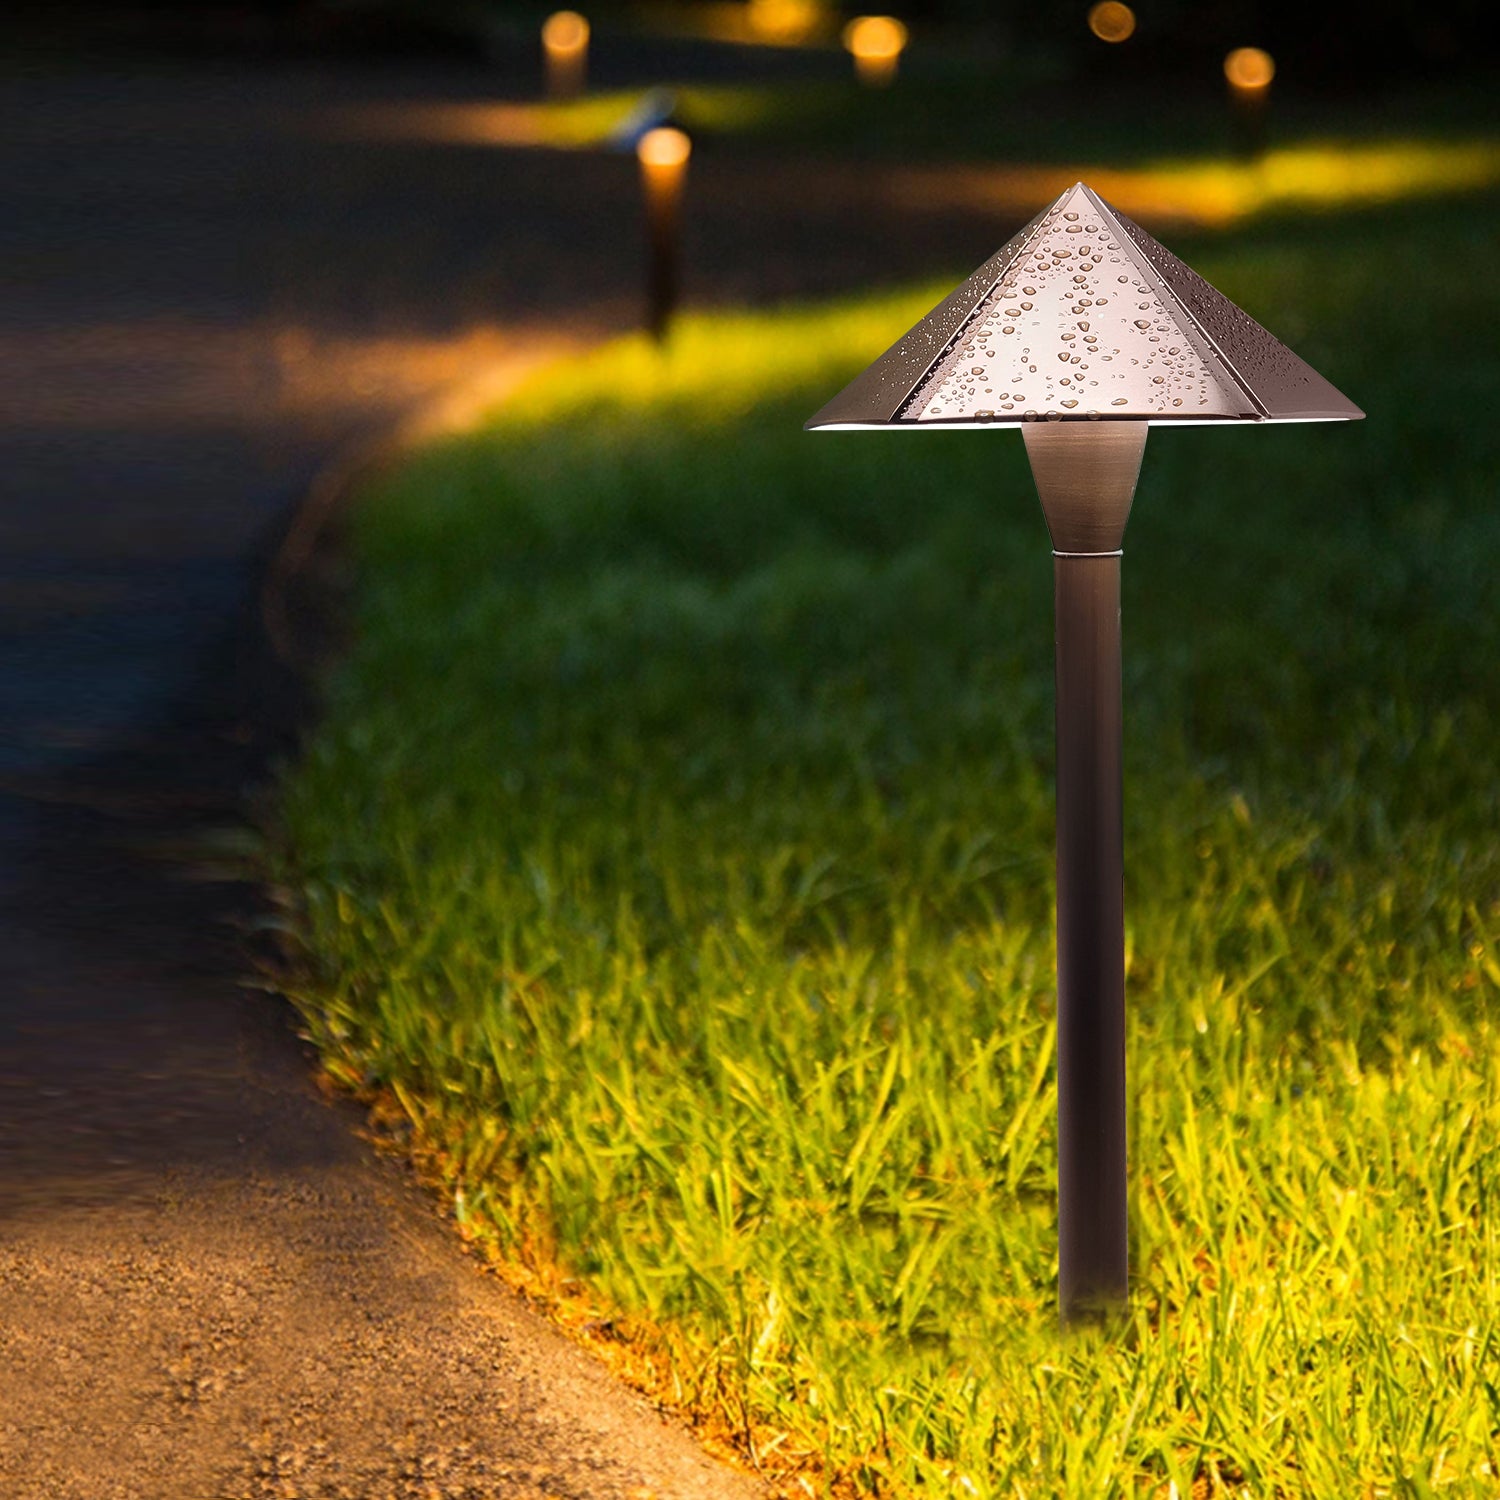 Brass low voltage pathway light illuminating a driveway and yard at night with other similar lights in the background